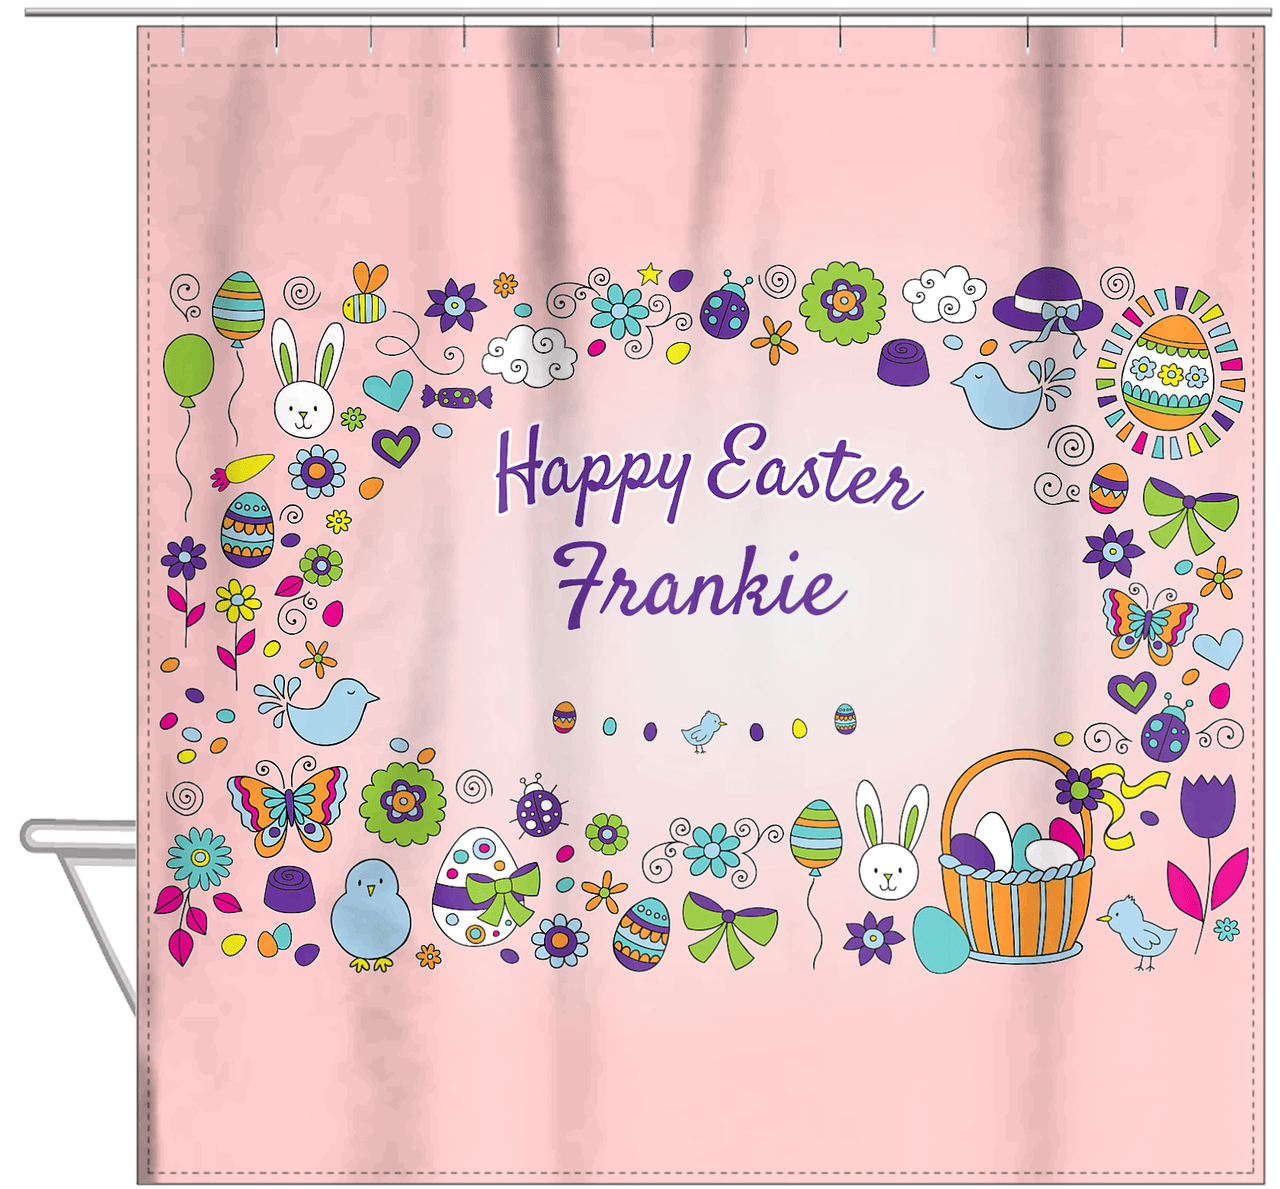 Personalized Easter Shower Curtain I - Easter Doodle - Pink Background - Hanging View